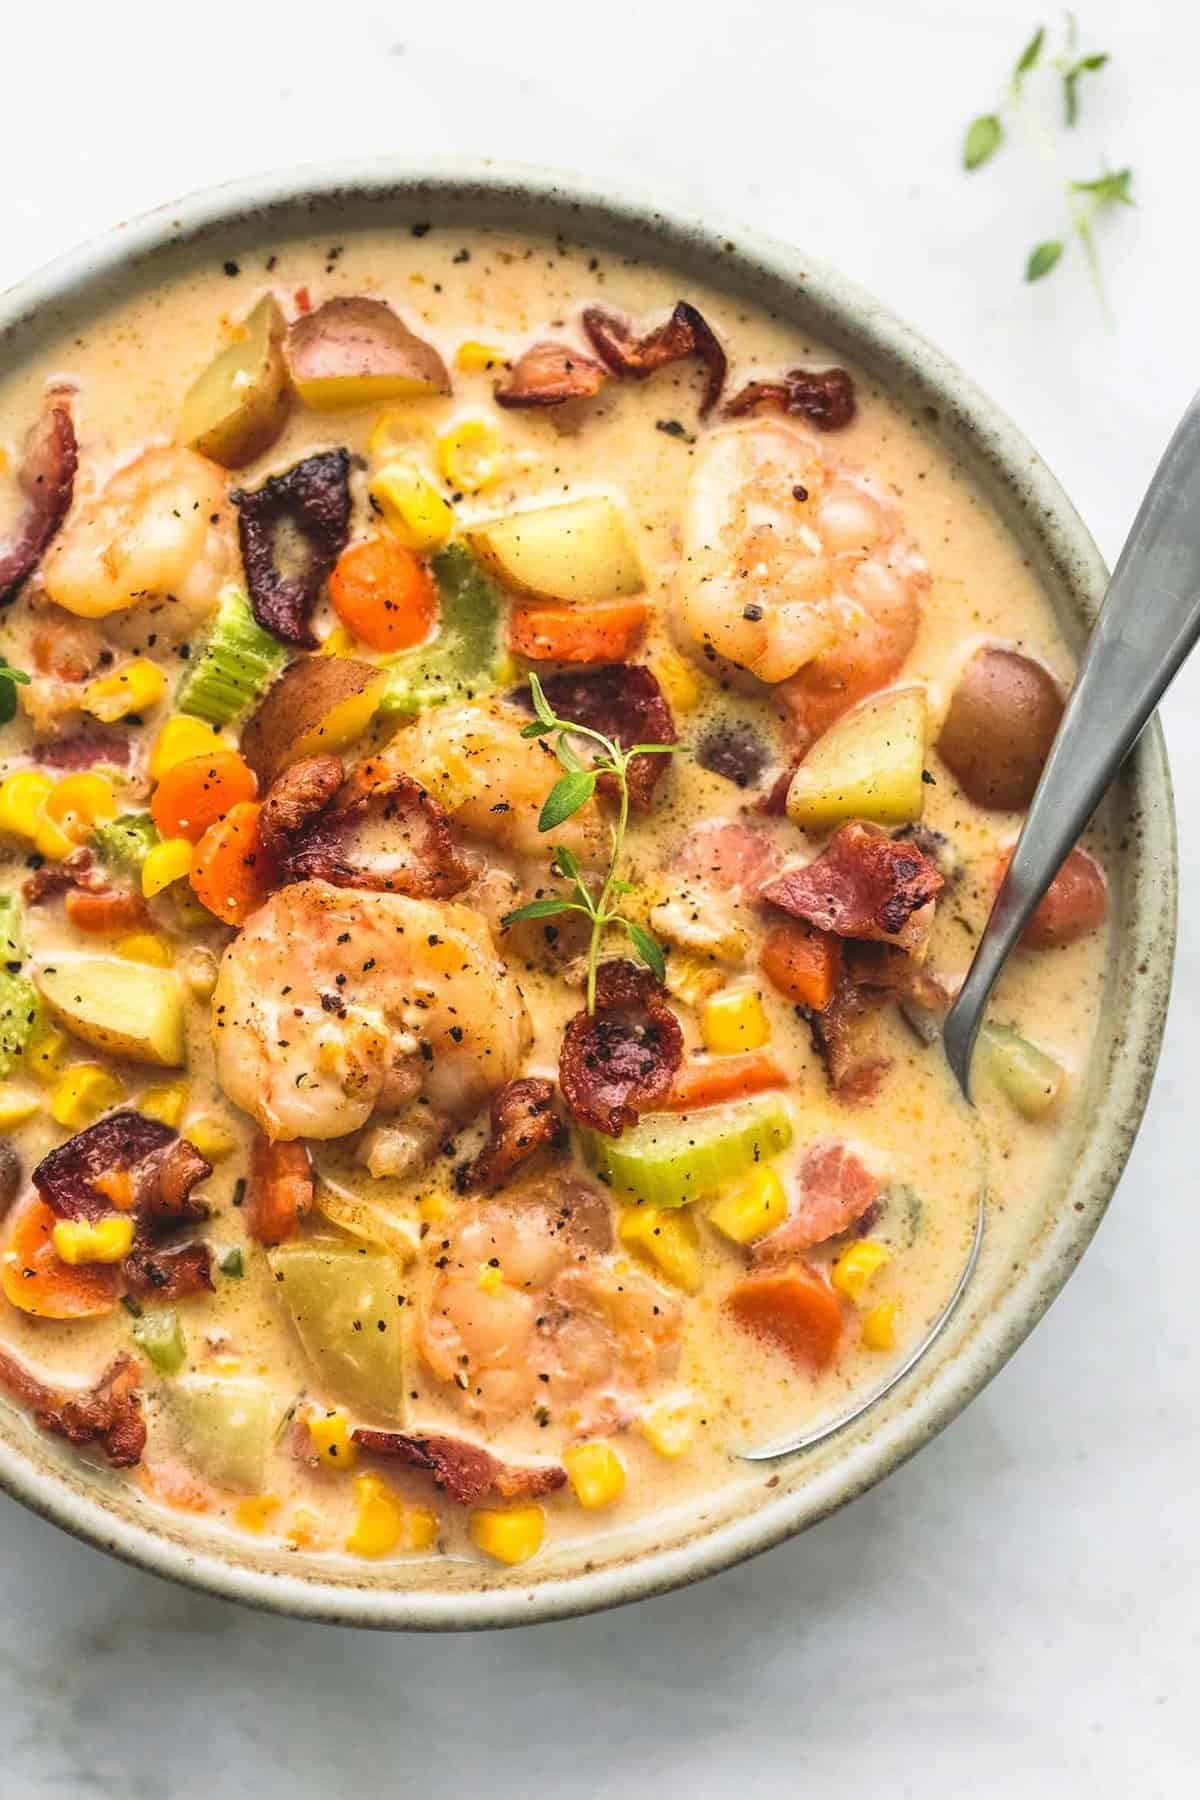 Chowder with corn, shrimp, and bacon.